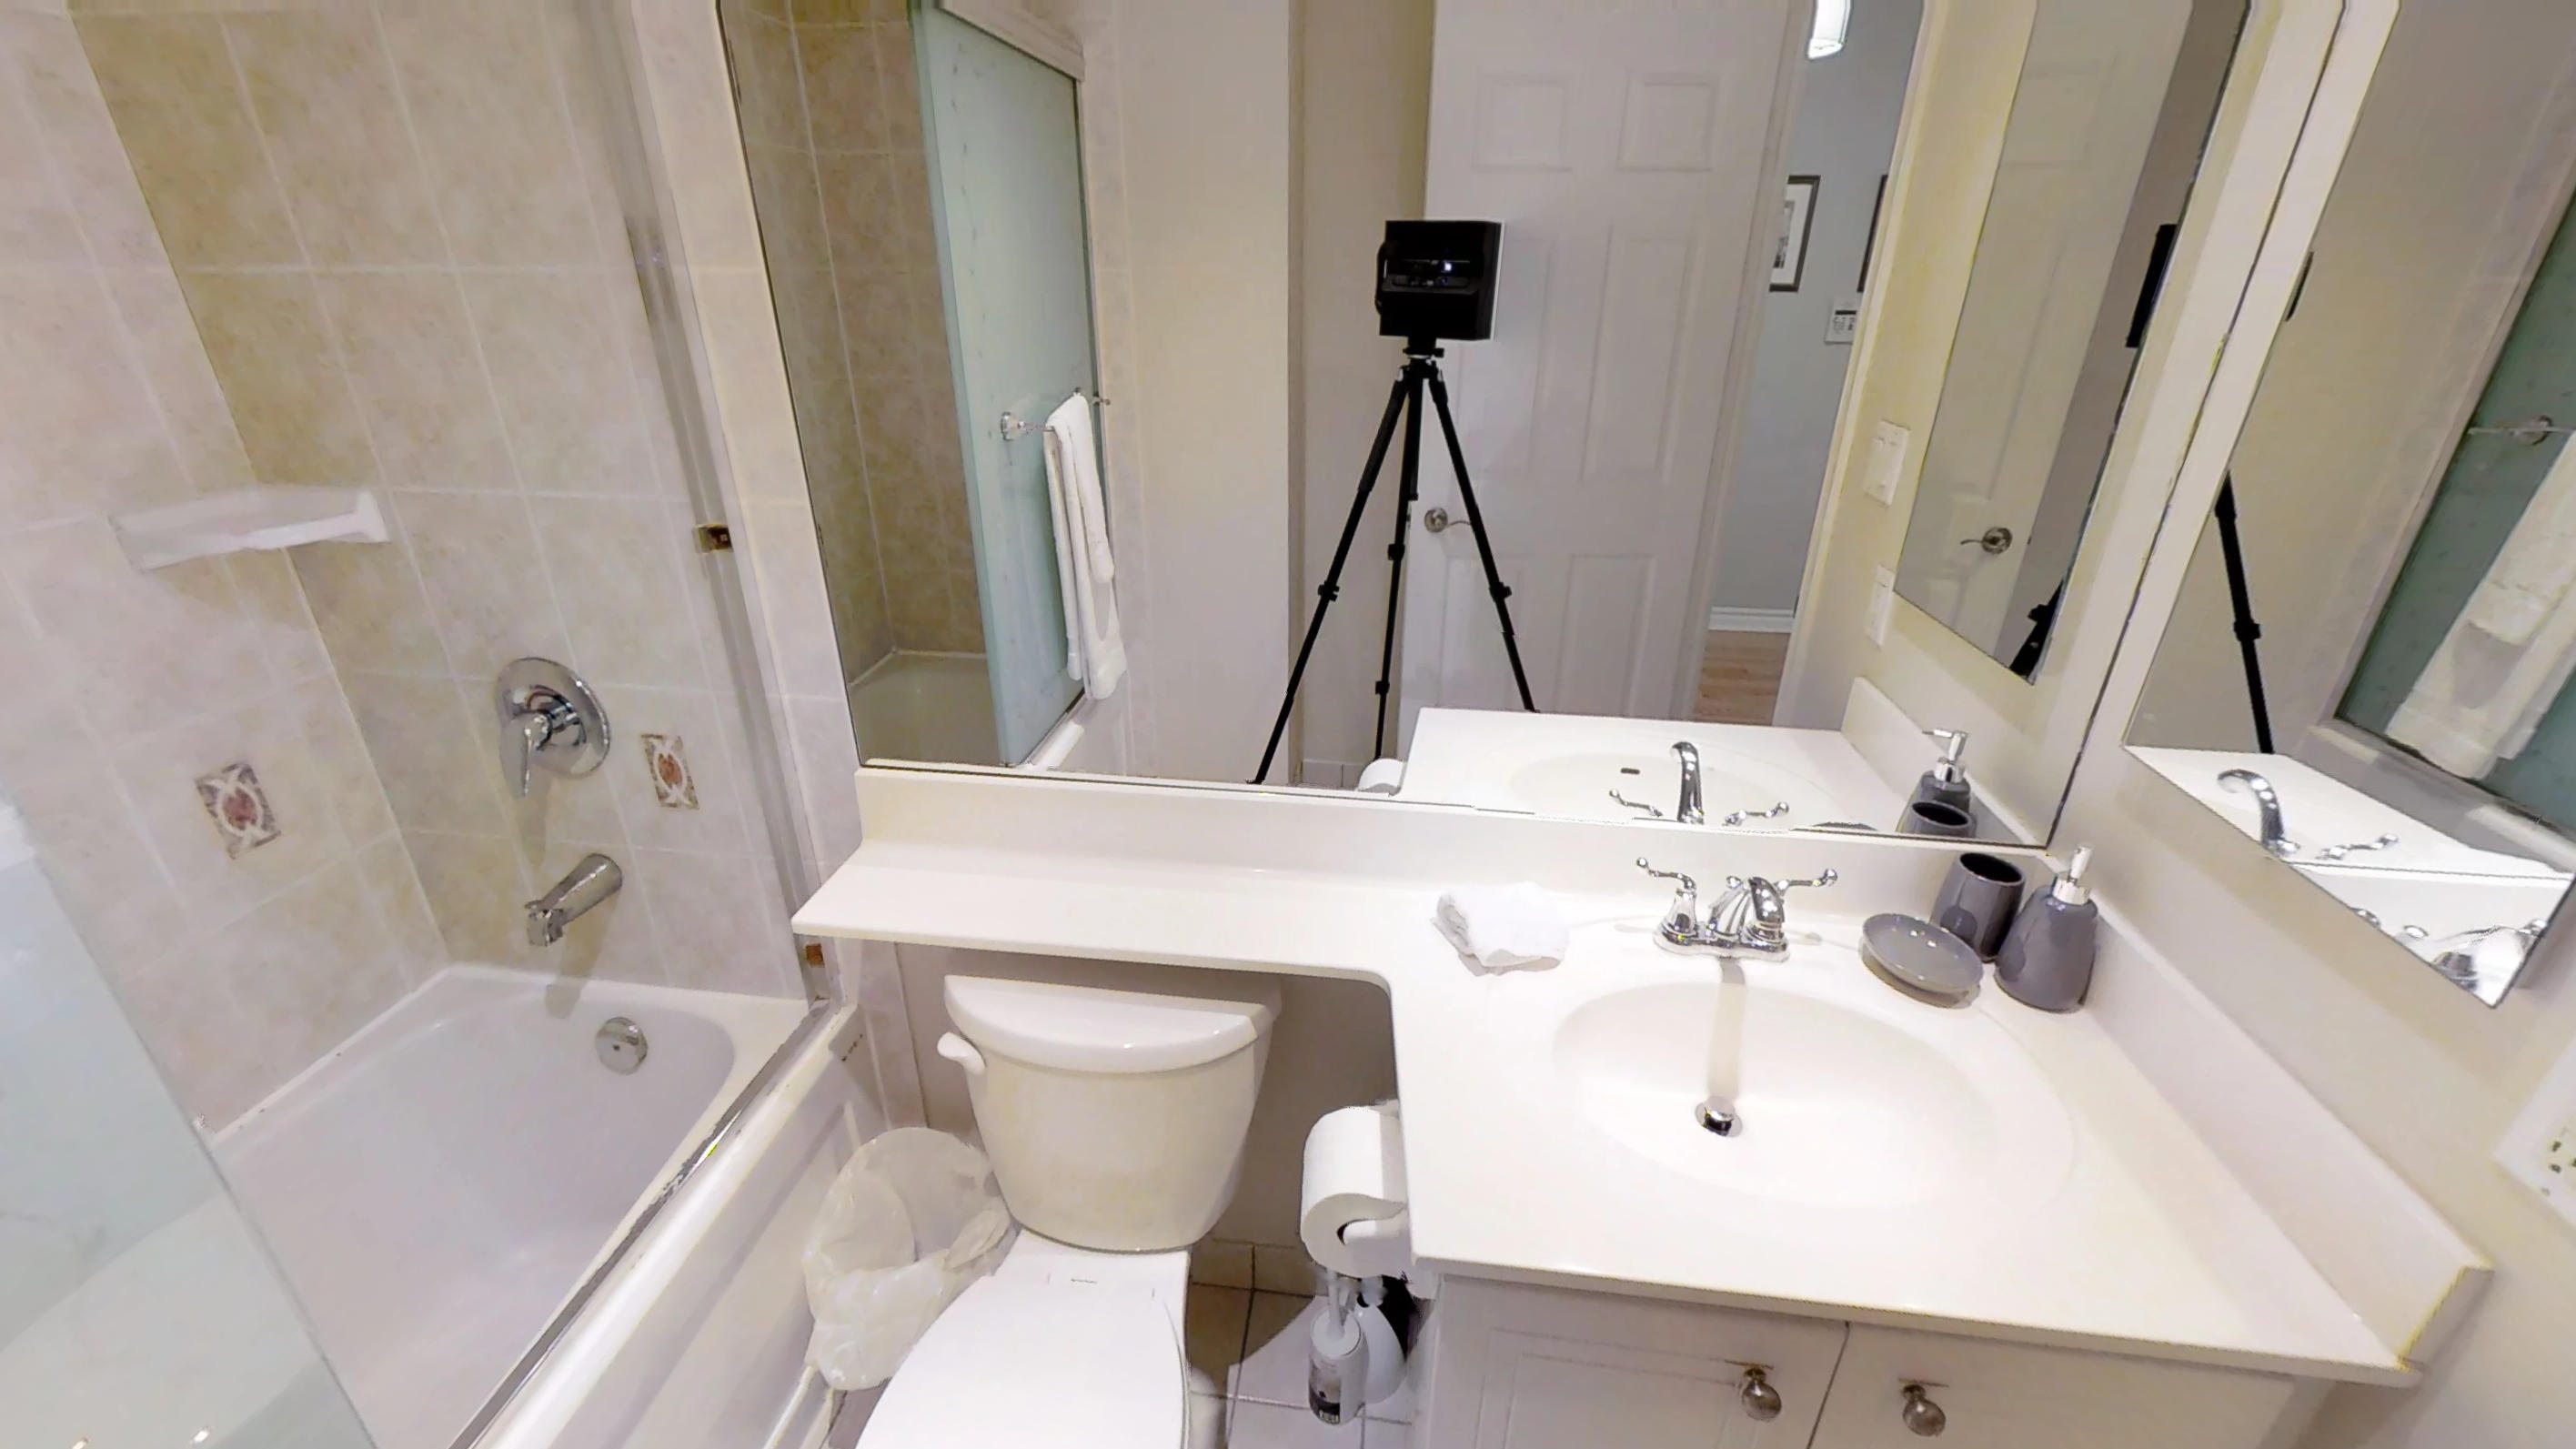 a view of the shower, countertop and toilet in the furnished bathroom of Icon G, near the CN tower in downtown Toronto.